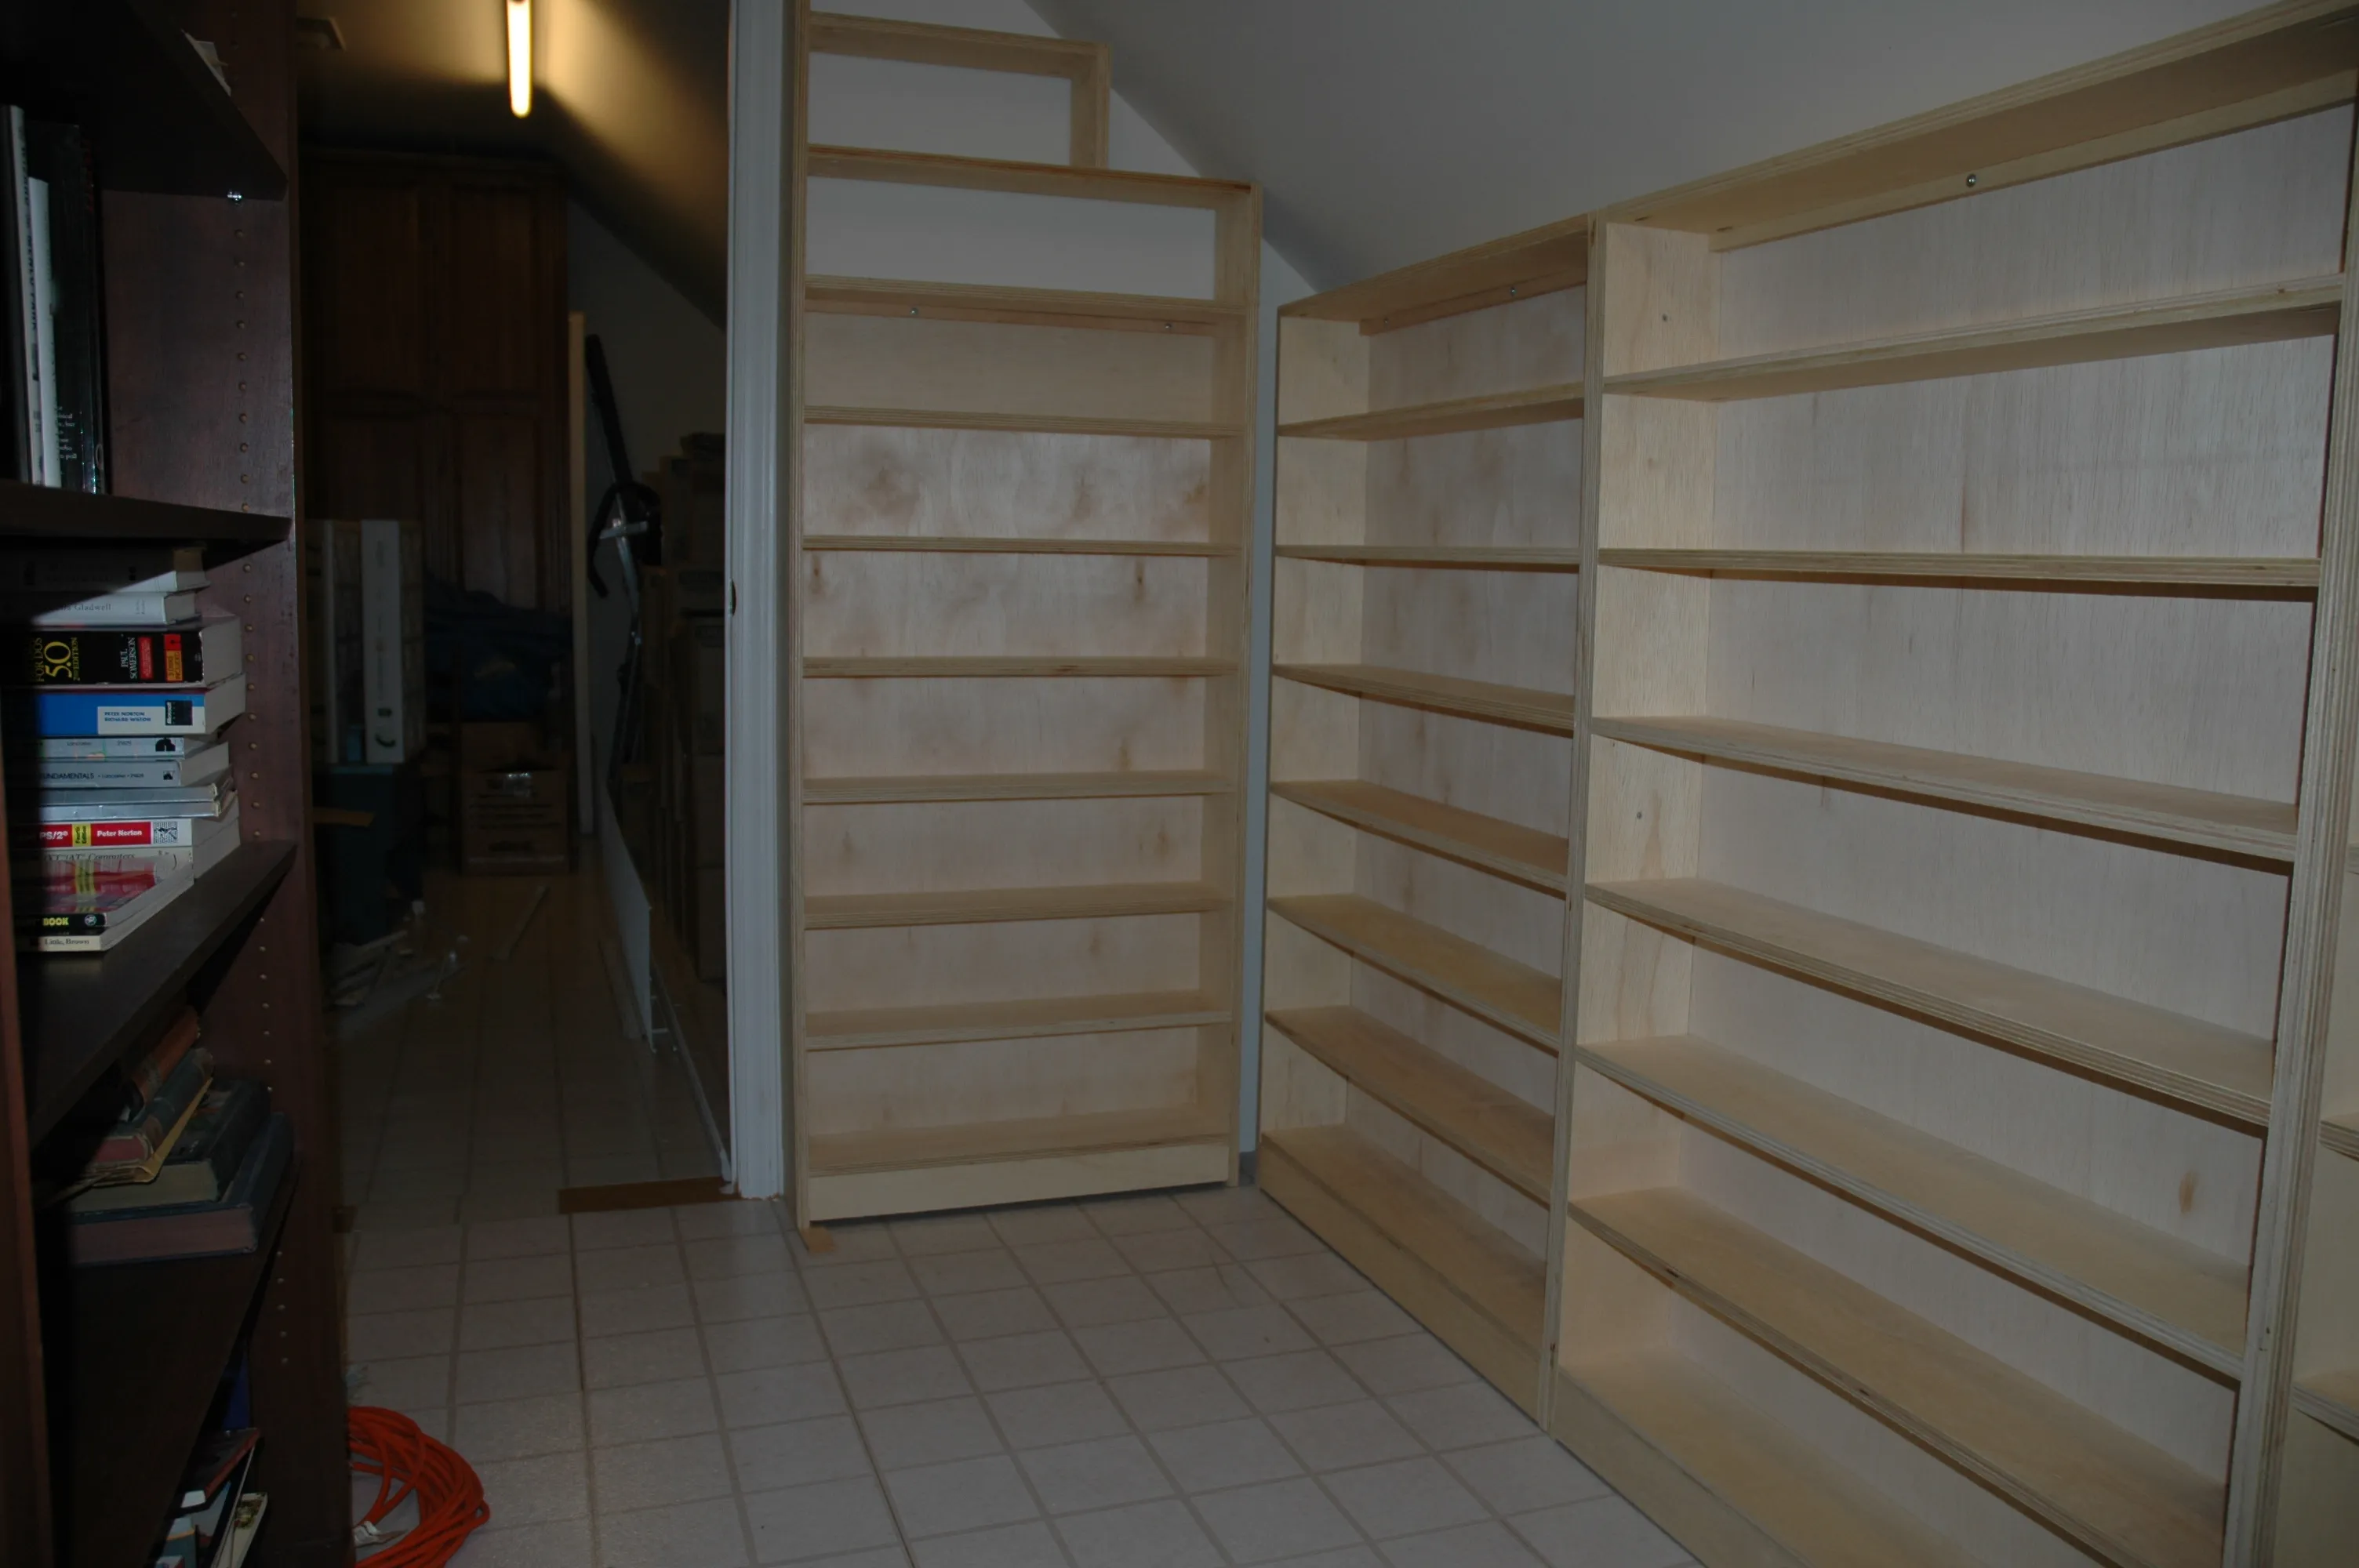 CD Shelving after 1